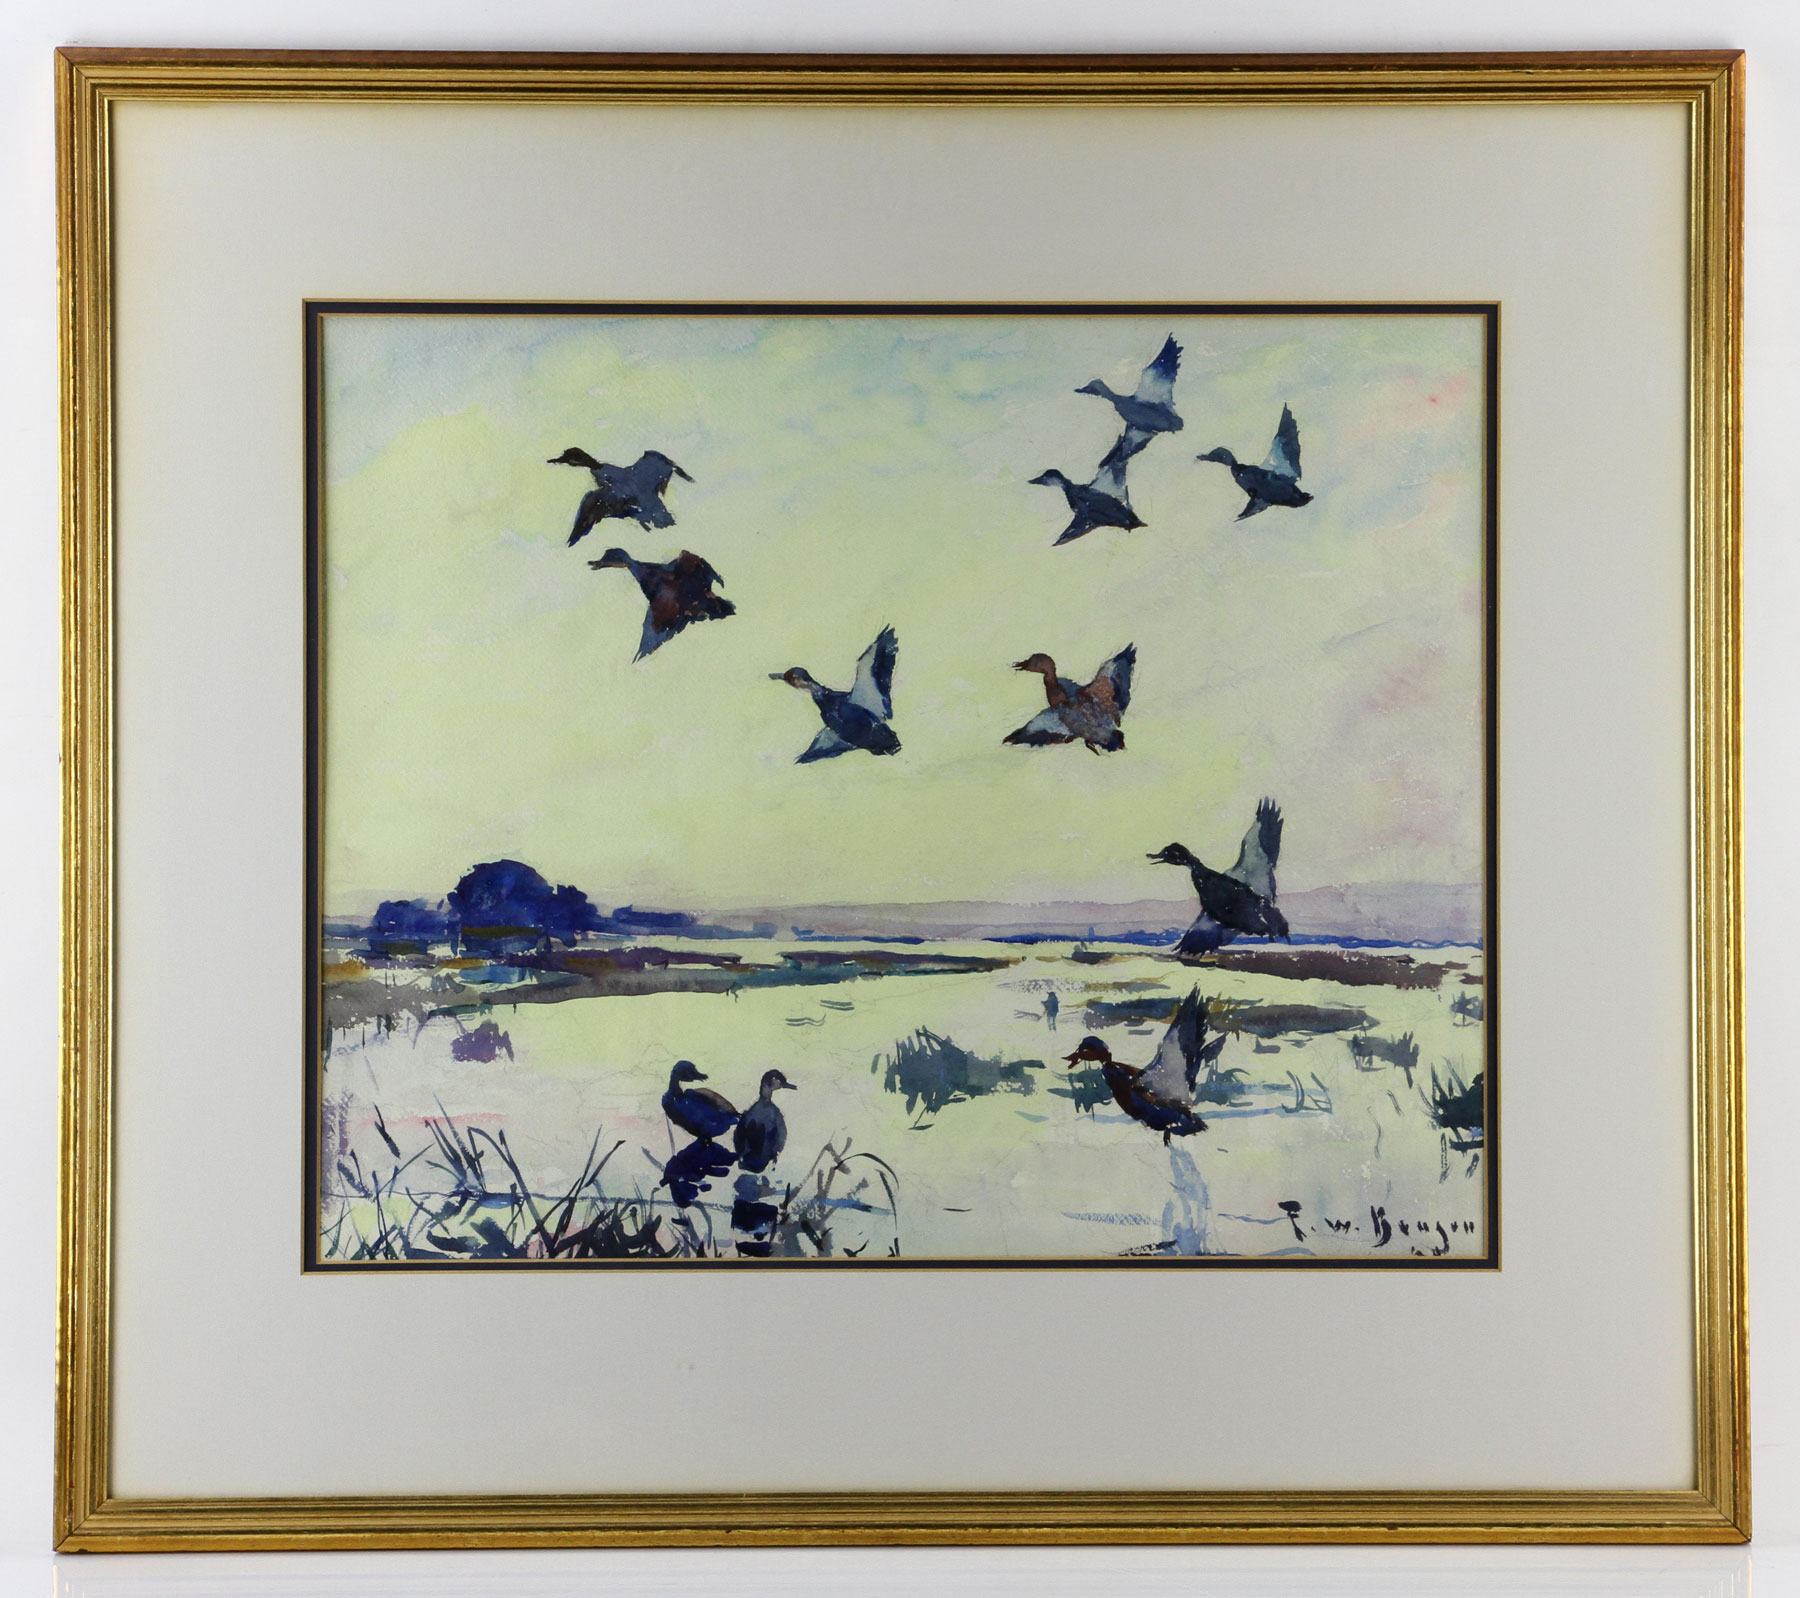 Frank W. Benson, "A Good Day for Ducks," Watercolor